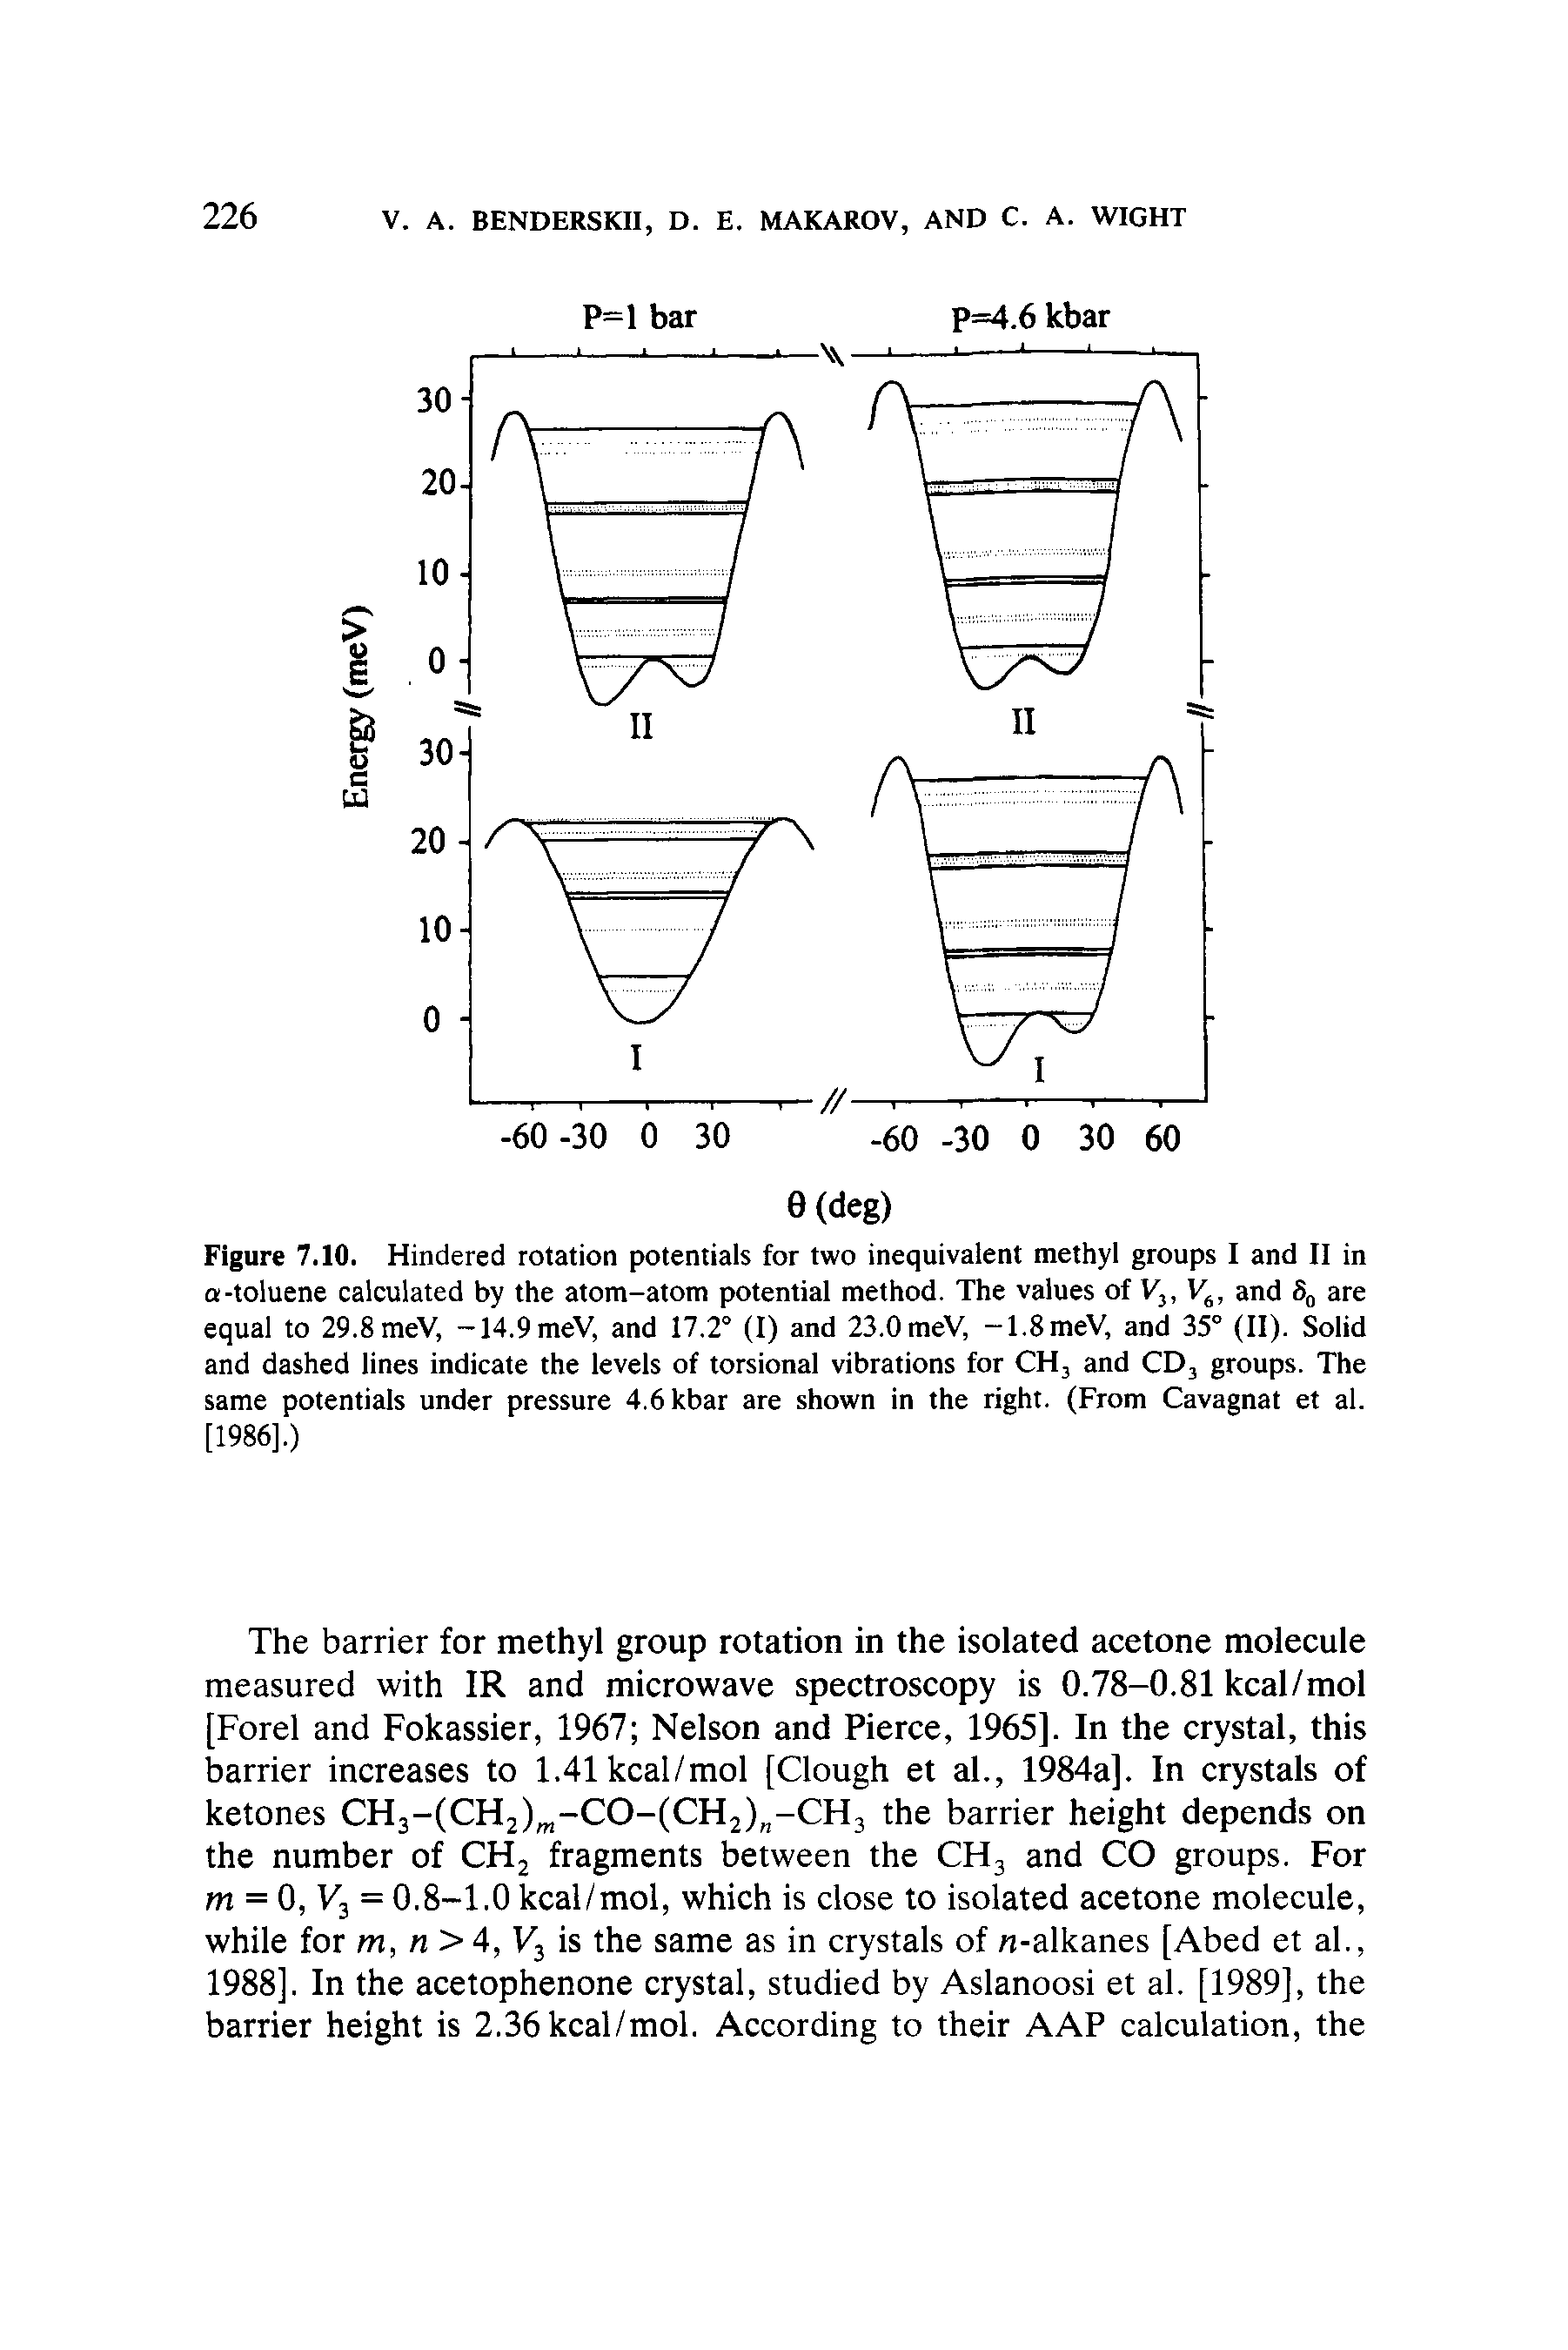 Figure 7.10. Hindered rotation potentials for two inequivalent methyl groups I and II in a-toluene calculated by the atom-atom potential method. The values of V, V6, and 80 are equal to 29.8meV, -14.9meV, and 17.2° (I) and 23.0meV, -1.8meV, and 35° (II). Solid and dashed lines indicate the levels of torsional vibrations for CH3 and CD3 groups. The same potentials under pressure 4.6 kbar are shown in the right. (From Cavagnat et al. [1986].)...